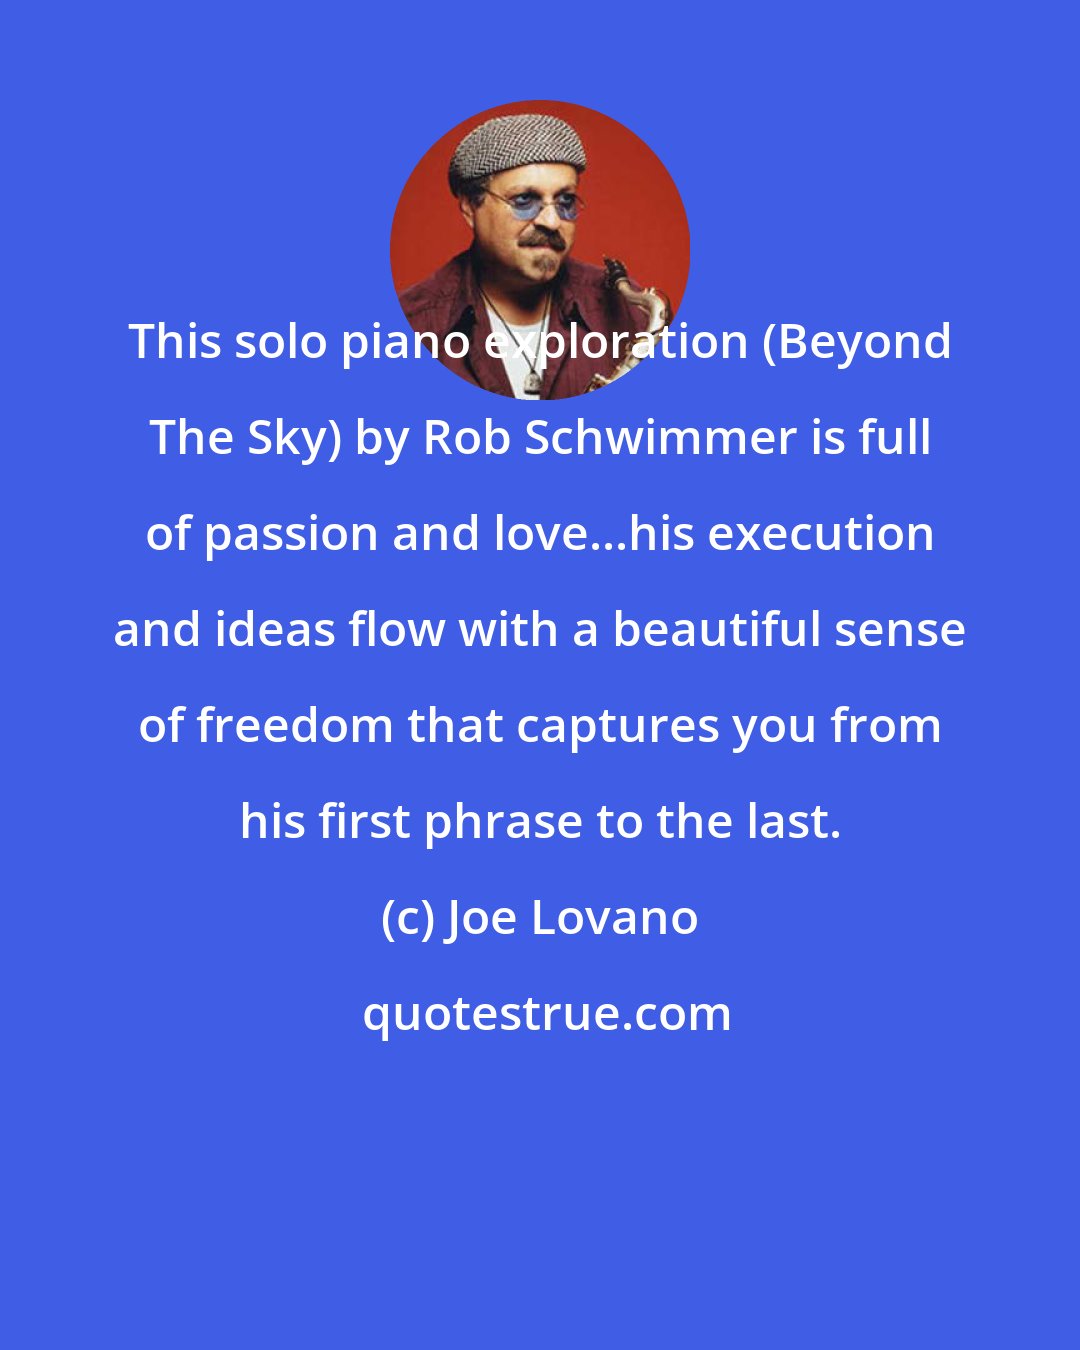 Joe Lovano: This solo piano exploration (Beyond The Sky) by Rob Schwimmer is full of passion and love...his execution and ideas flow with a beautiful sense of freedom that captures you from his first phrase to the last.